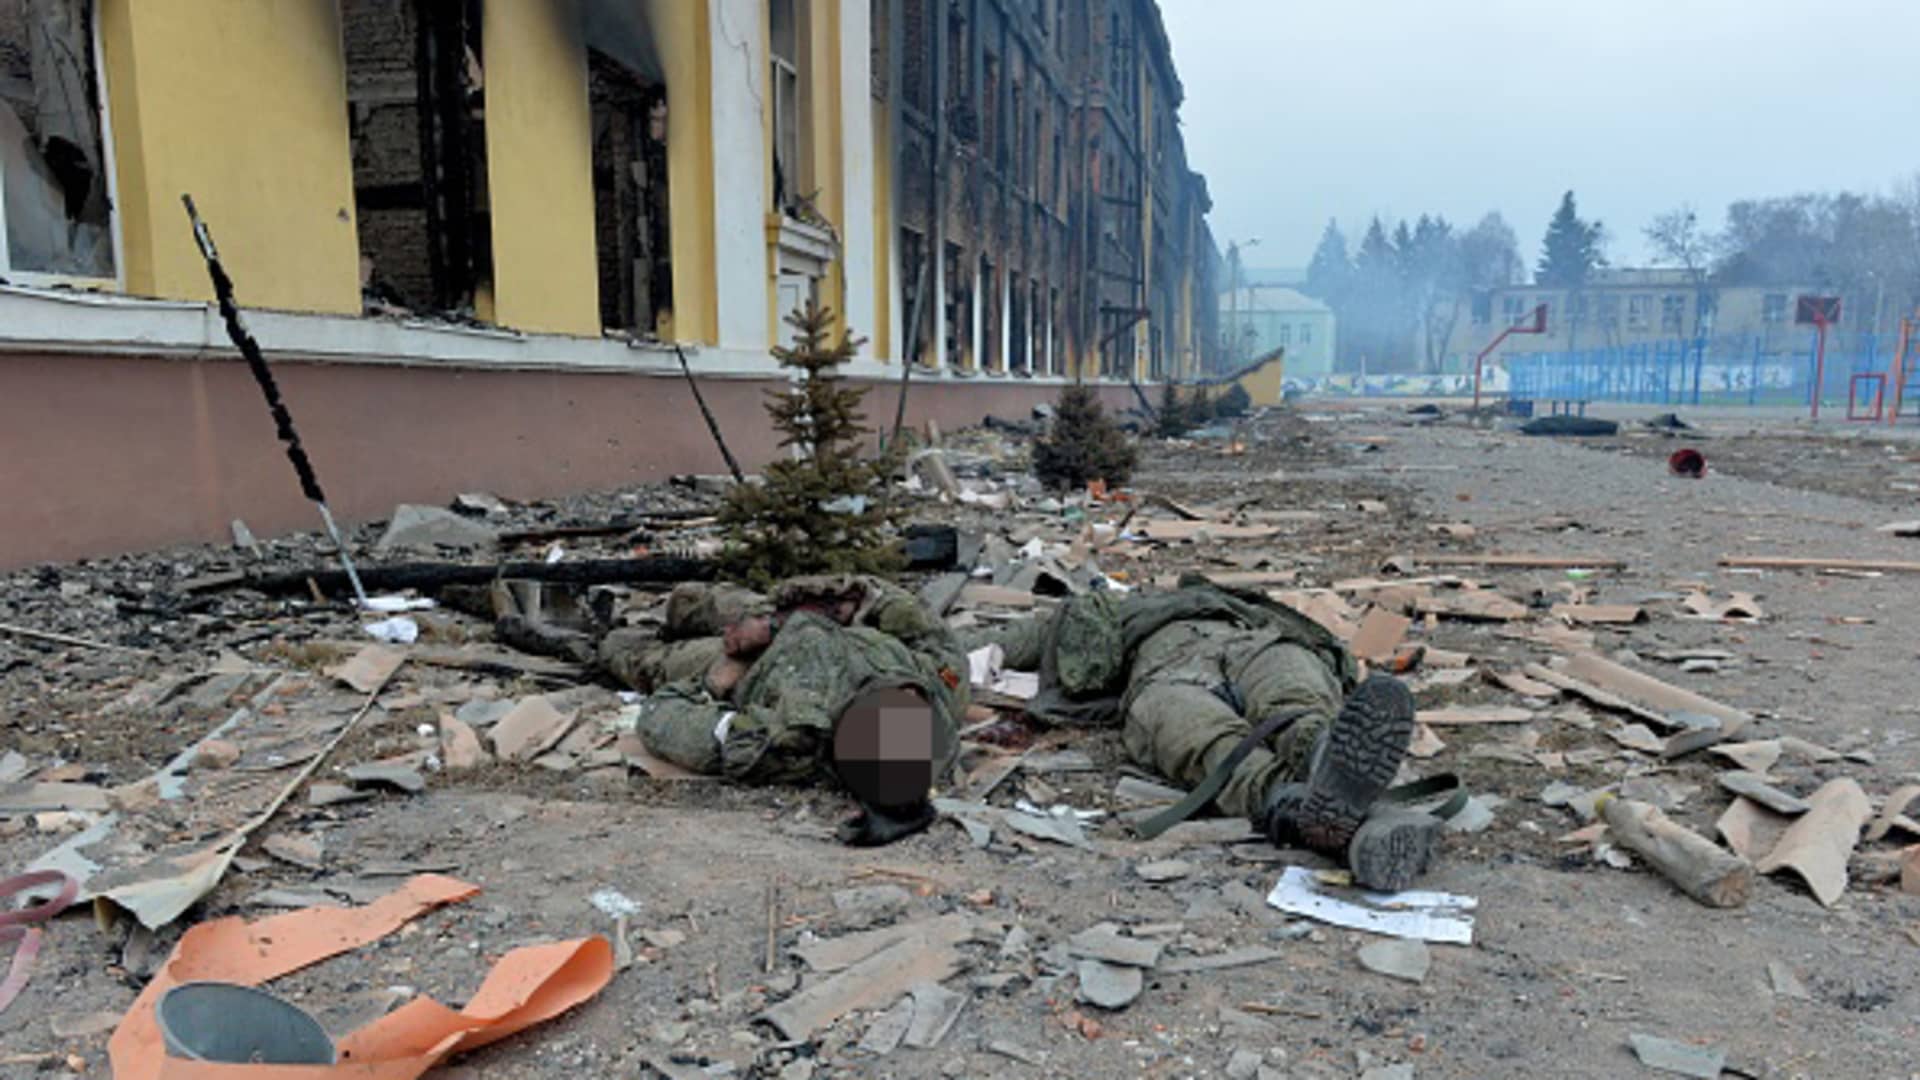 Bodies of Russian soldiers lay outside a school destroyed as a result of fight not far from the center of Ukrainian city of Kharkiv, located some 50 km from Ukrainian-Russian border, on February 28, 2022.